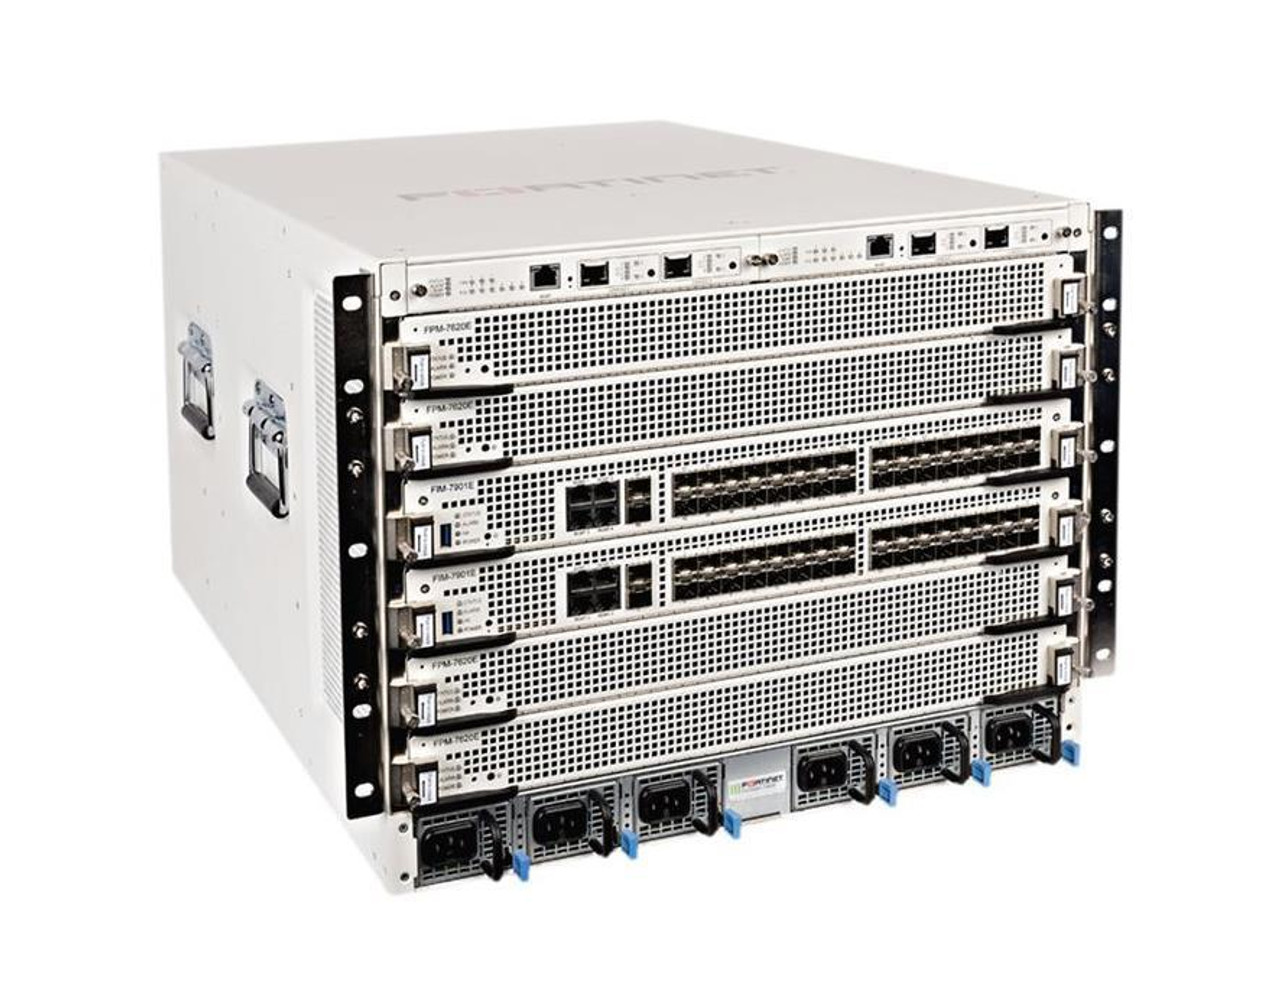 Fortinet FortiGate 7060E-DC Network Security/Firewall Appliance - 6 Total Expansion Slots - 8U -